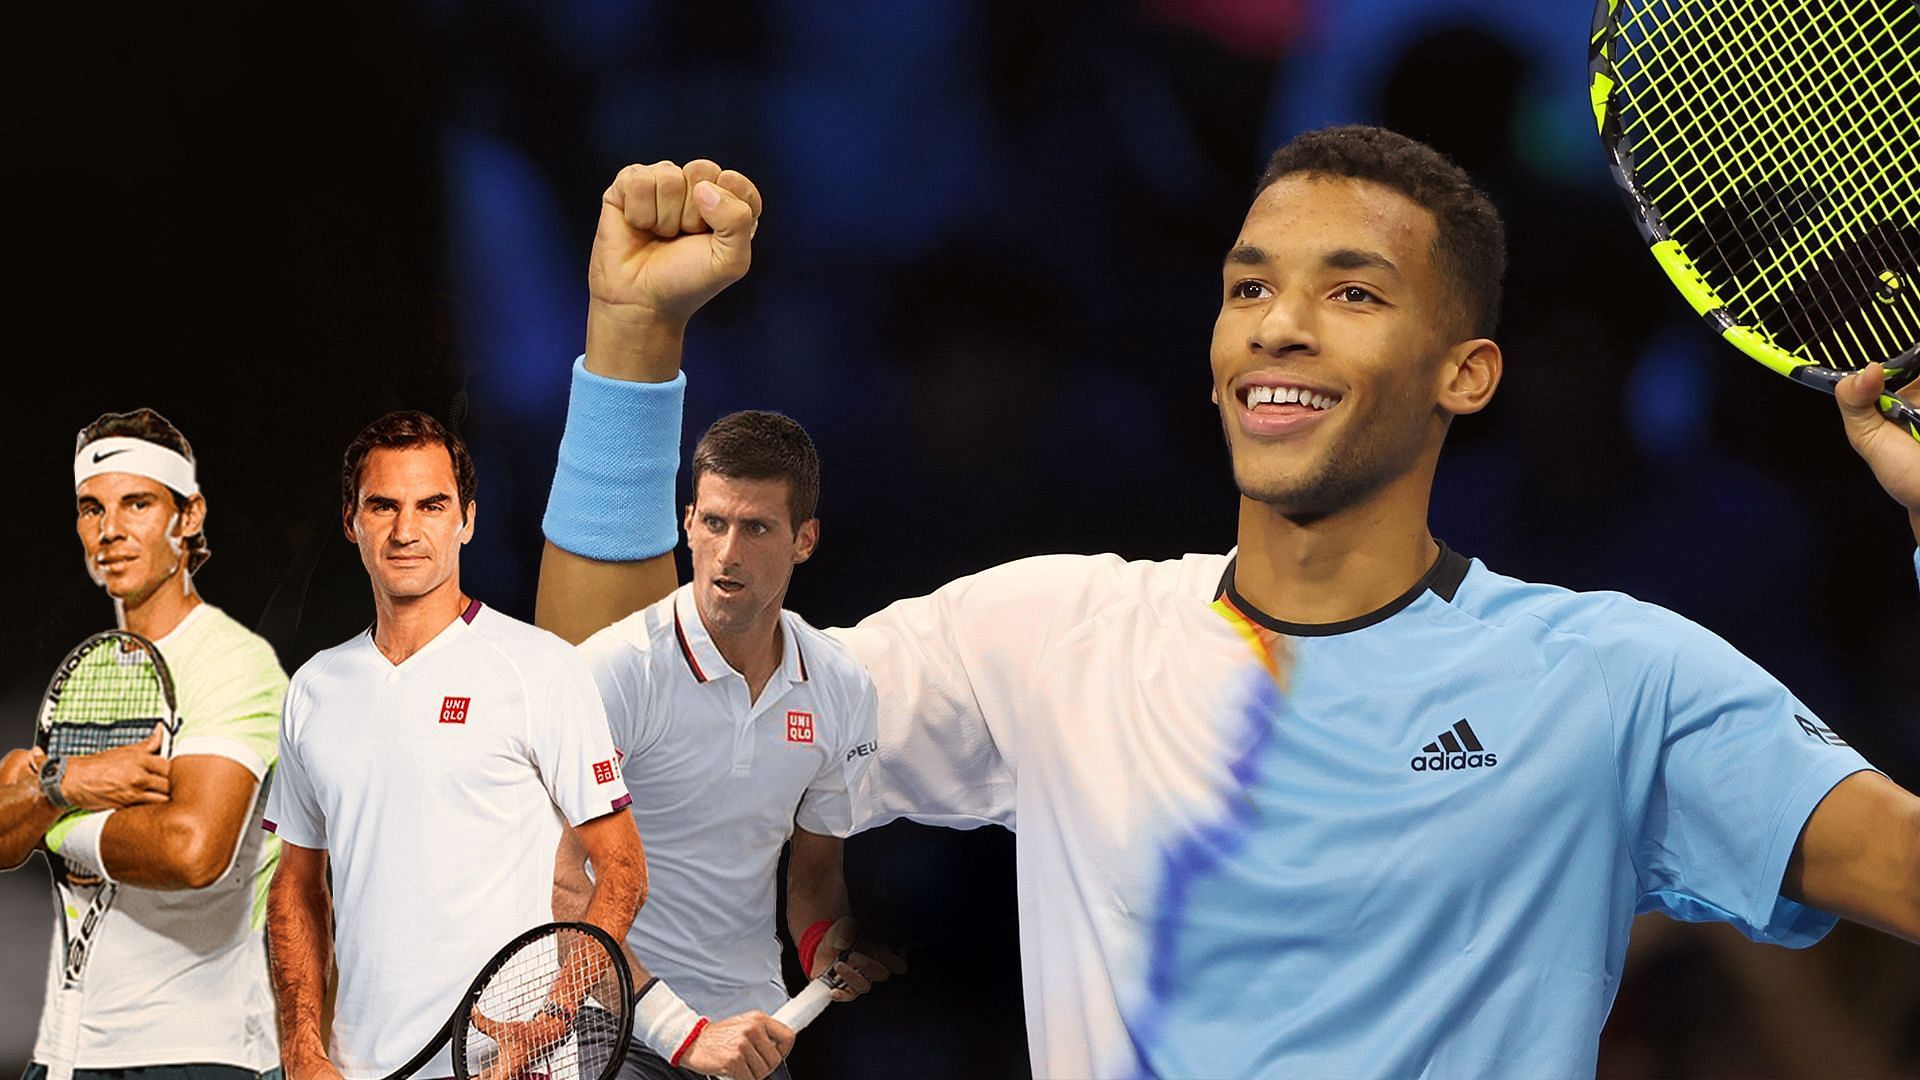 Felix Auger-Aliassime becomes the first and possibly only player born in 2000s to beat Federer, Djokovic and Nadal